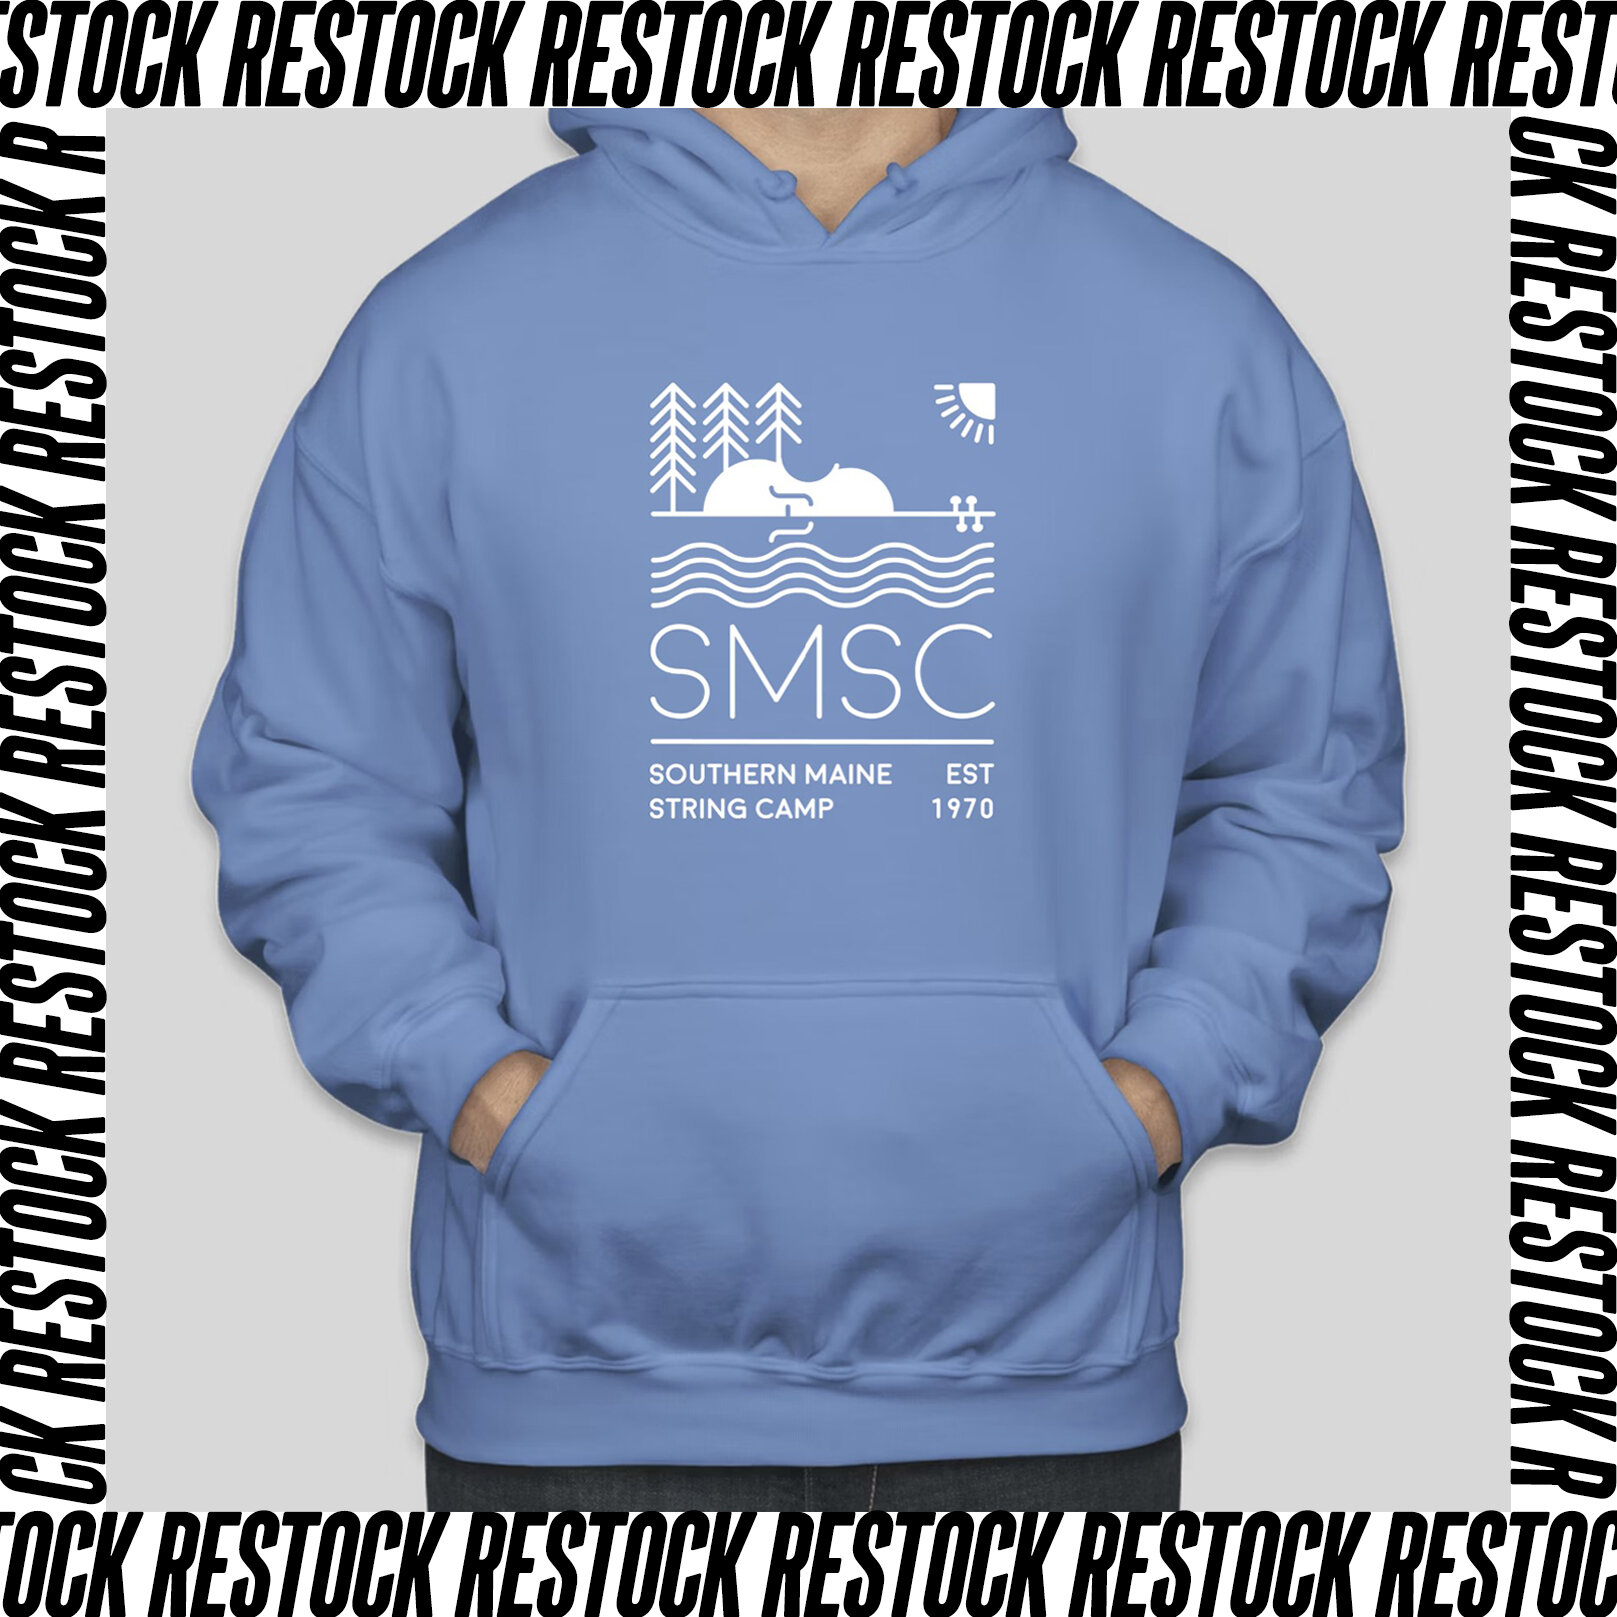 Back by popular demand! The light blue logo hoodie is now fully restocked and available for purchase with shipping in the camp store! Go to the link in our bio to place your order today.

#southernmainestringcamp #maine #camp #merch